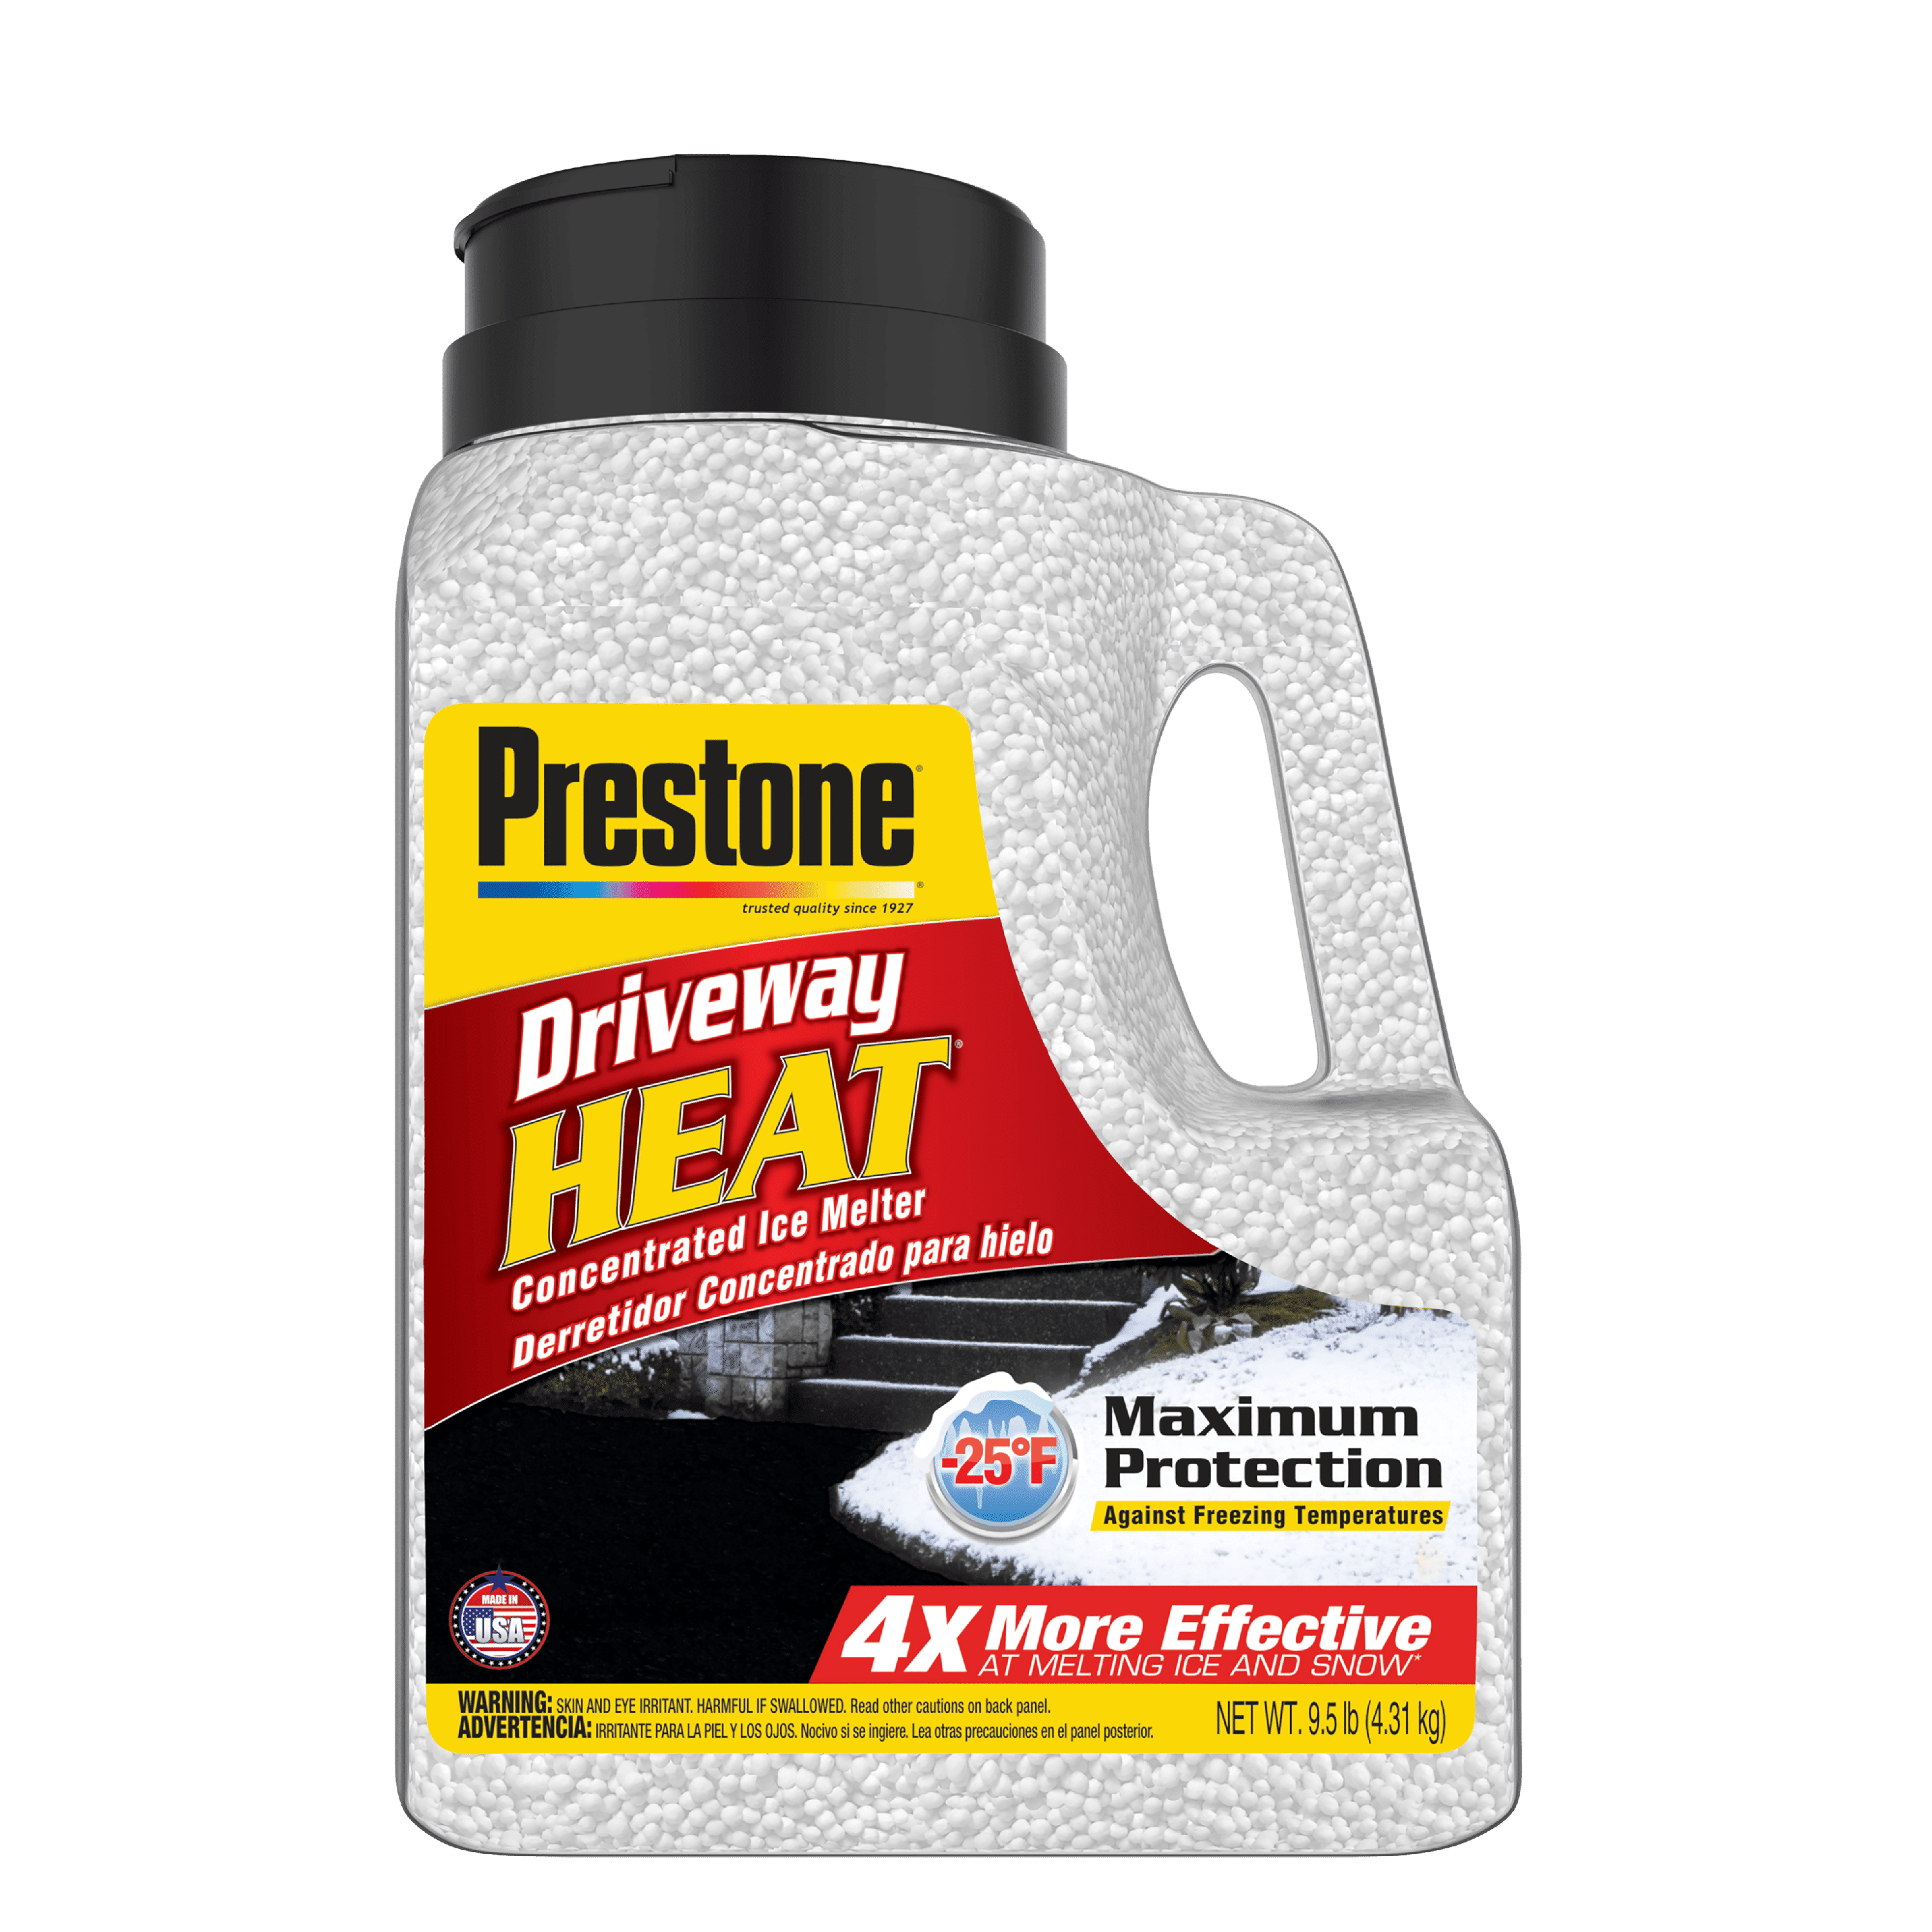 Prestone Driveway Heat Fast Acting Calcium Chloride Concentrated Ice Melt 9.5-lb 